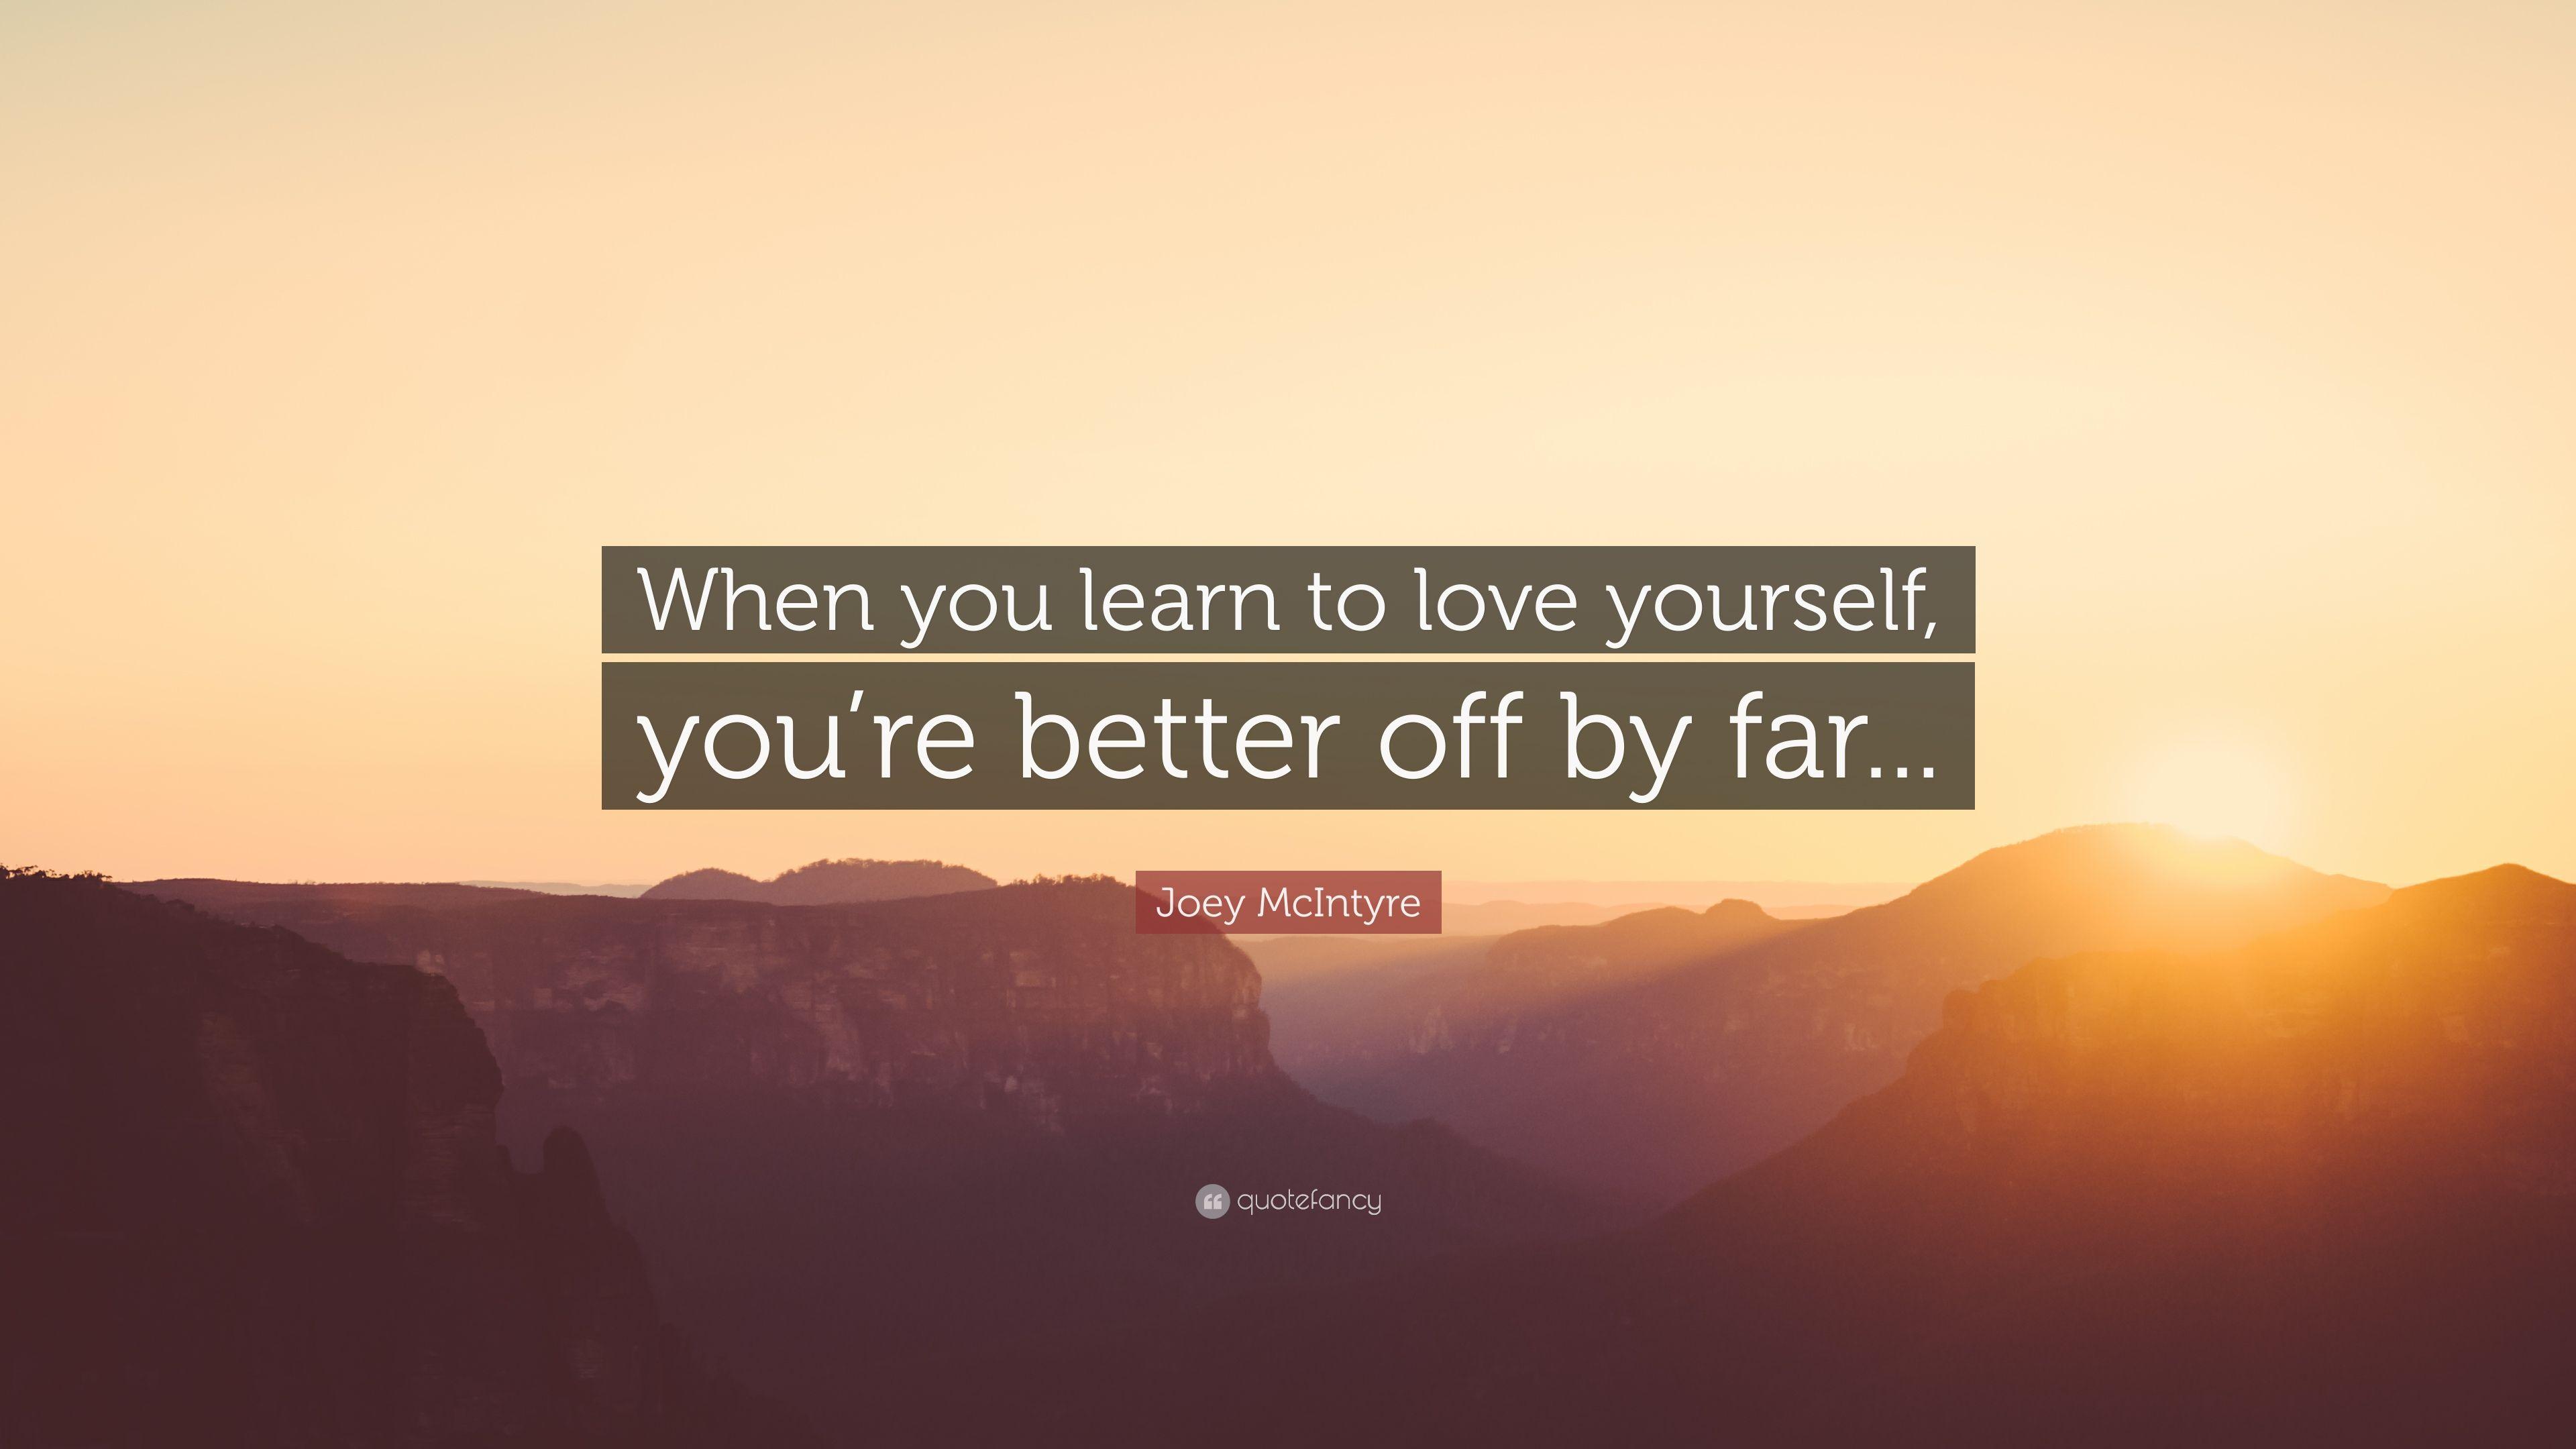 Joey McIntyre Quote: “When you learn to love yourself, you're better